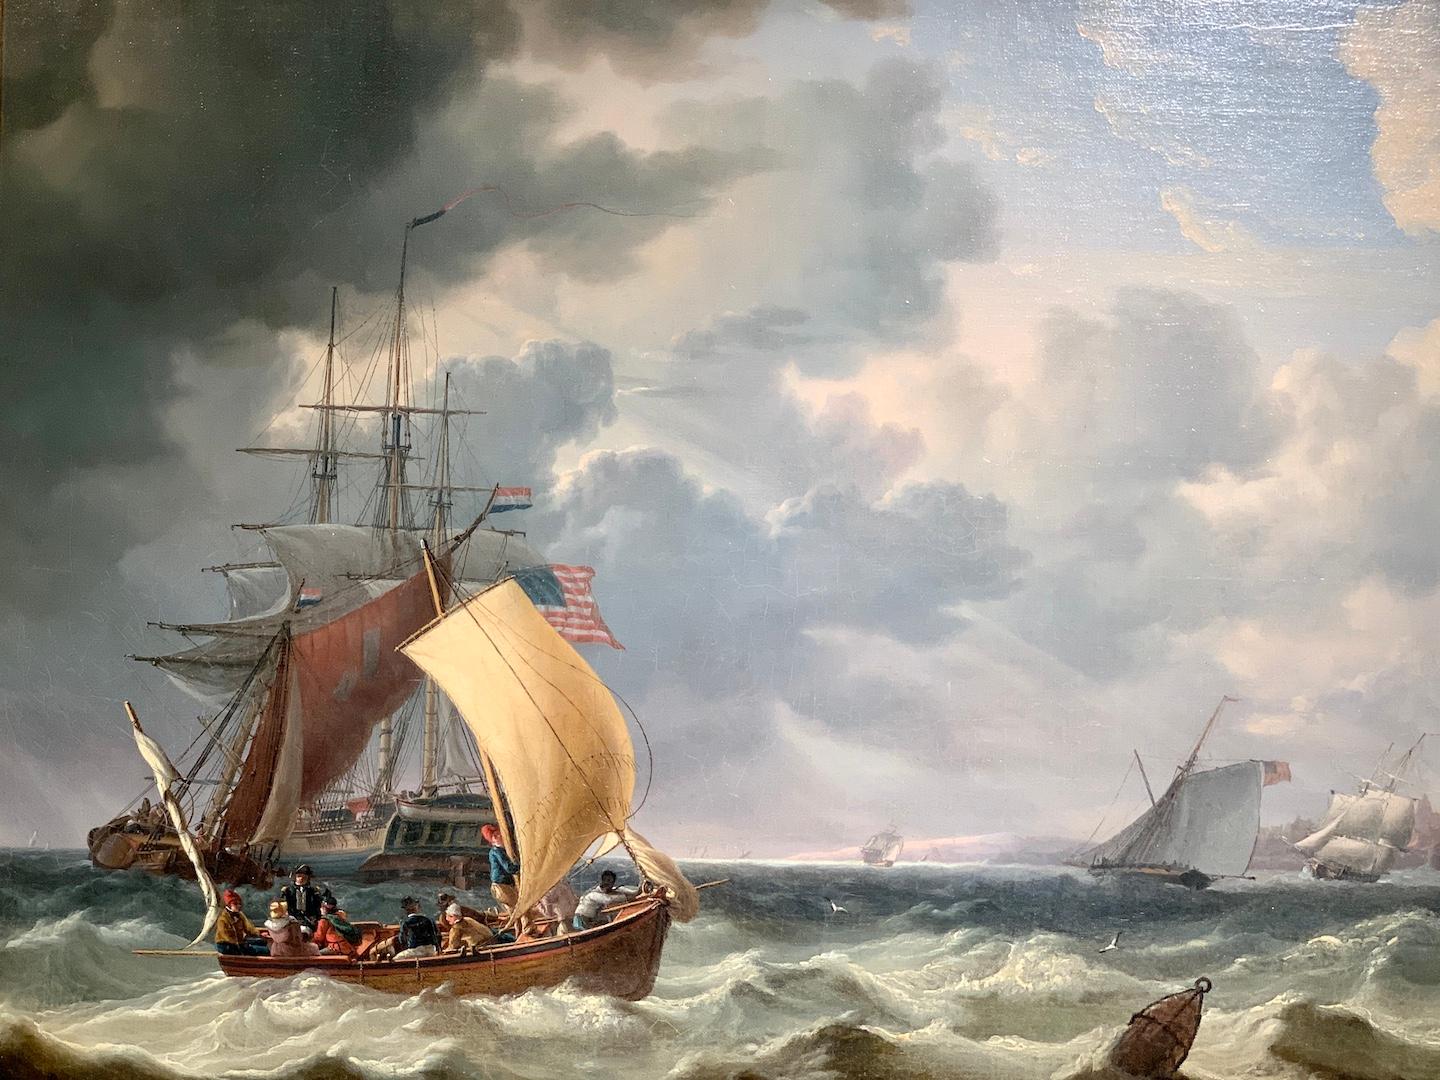 19th century American, Dutch and English shipping scene off a city coastline - Painting by Robert Salmon